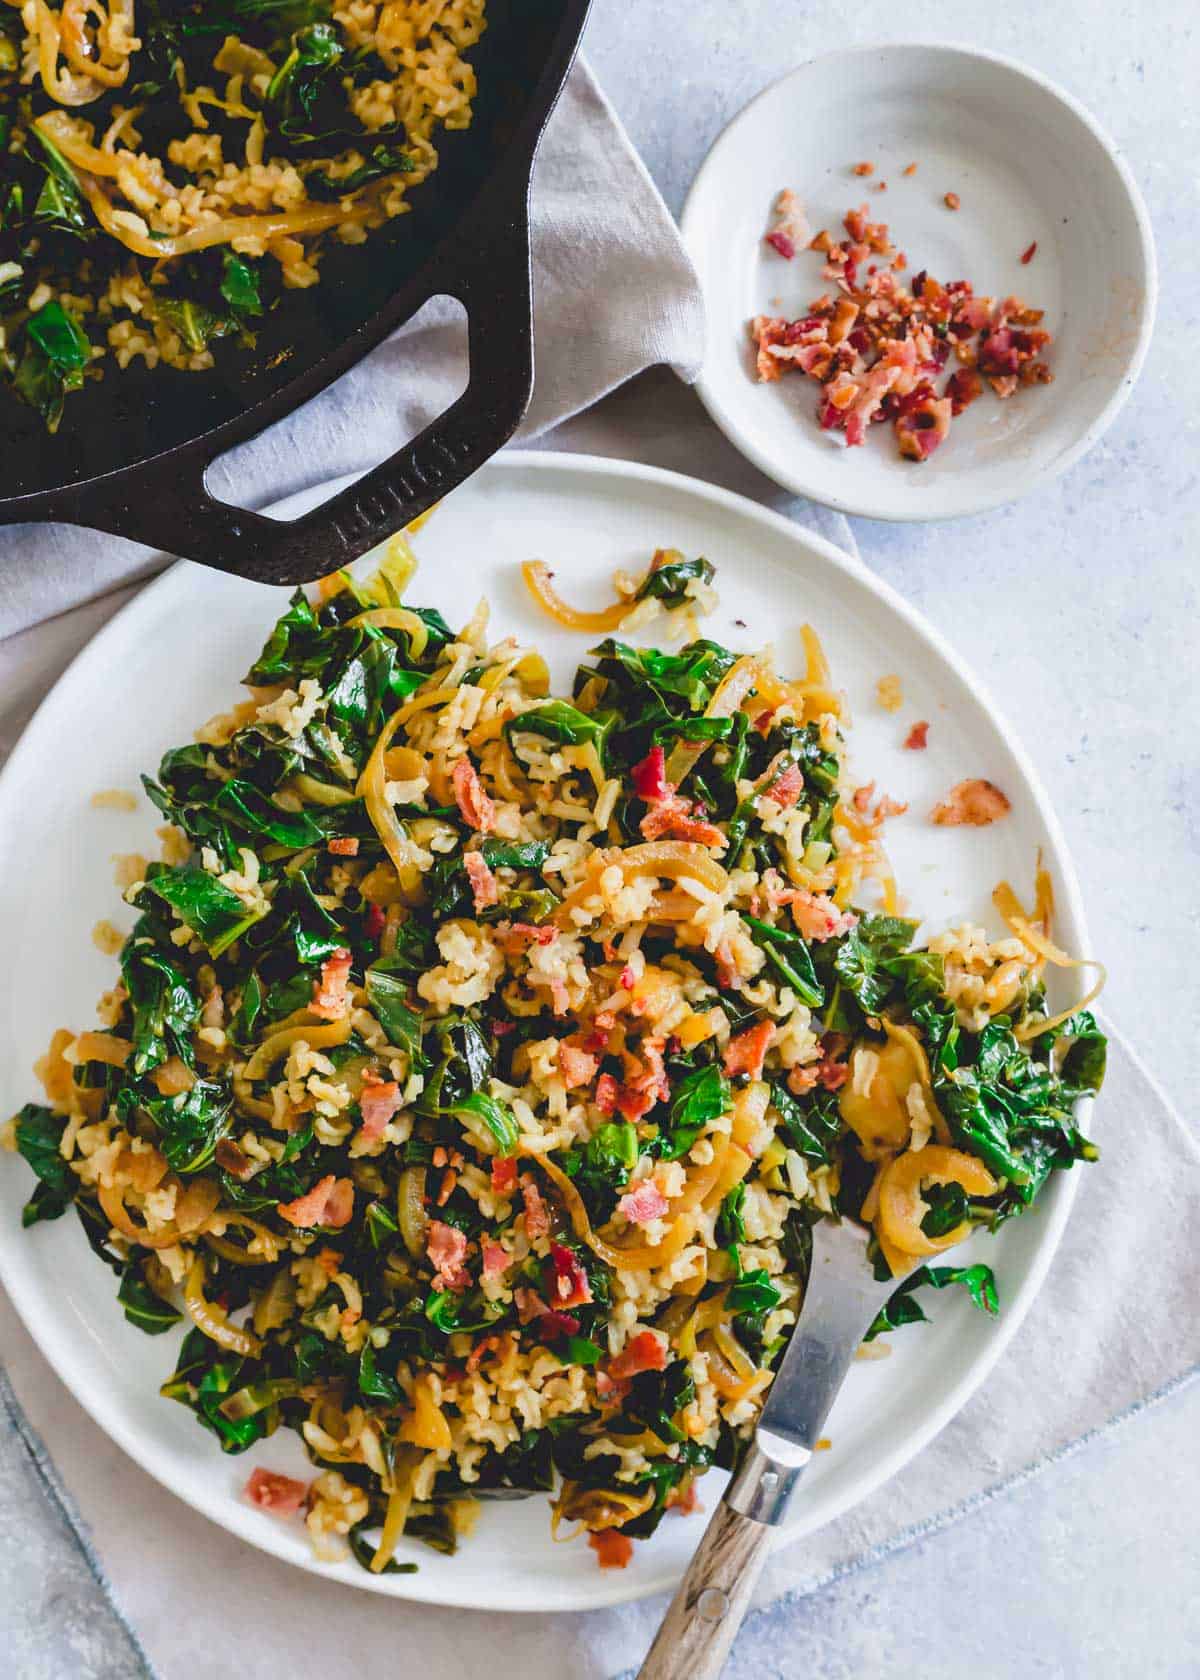 Collard greens side dish with rice, onions, bacon and spices.